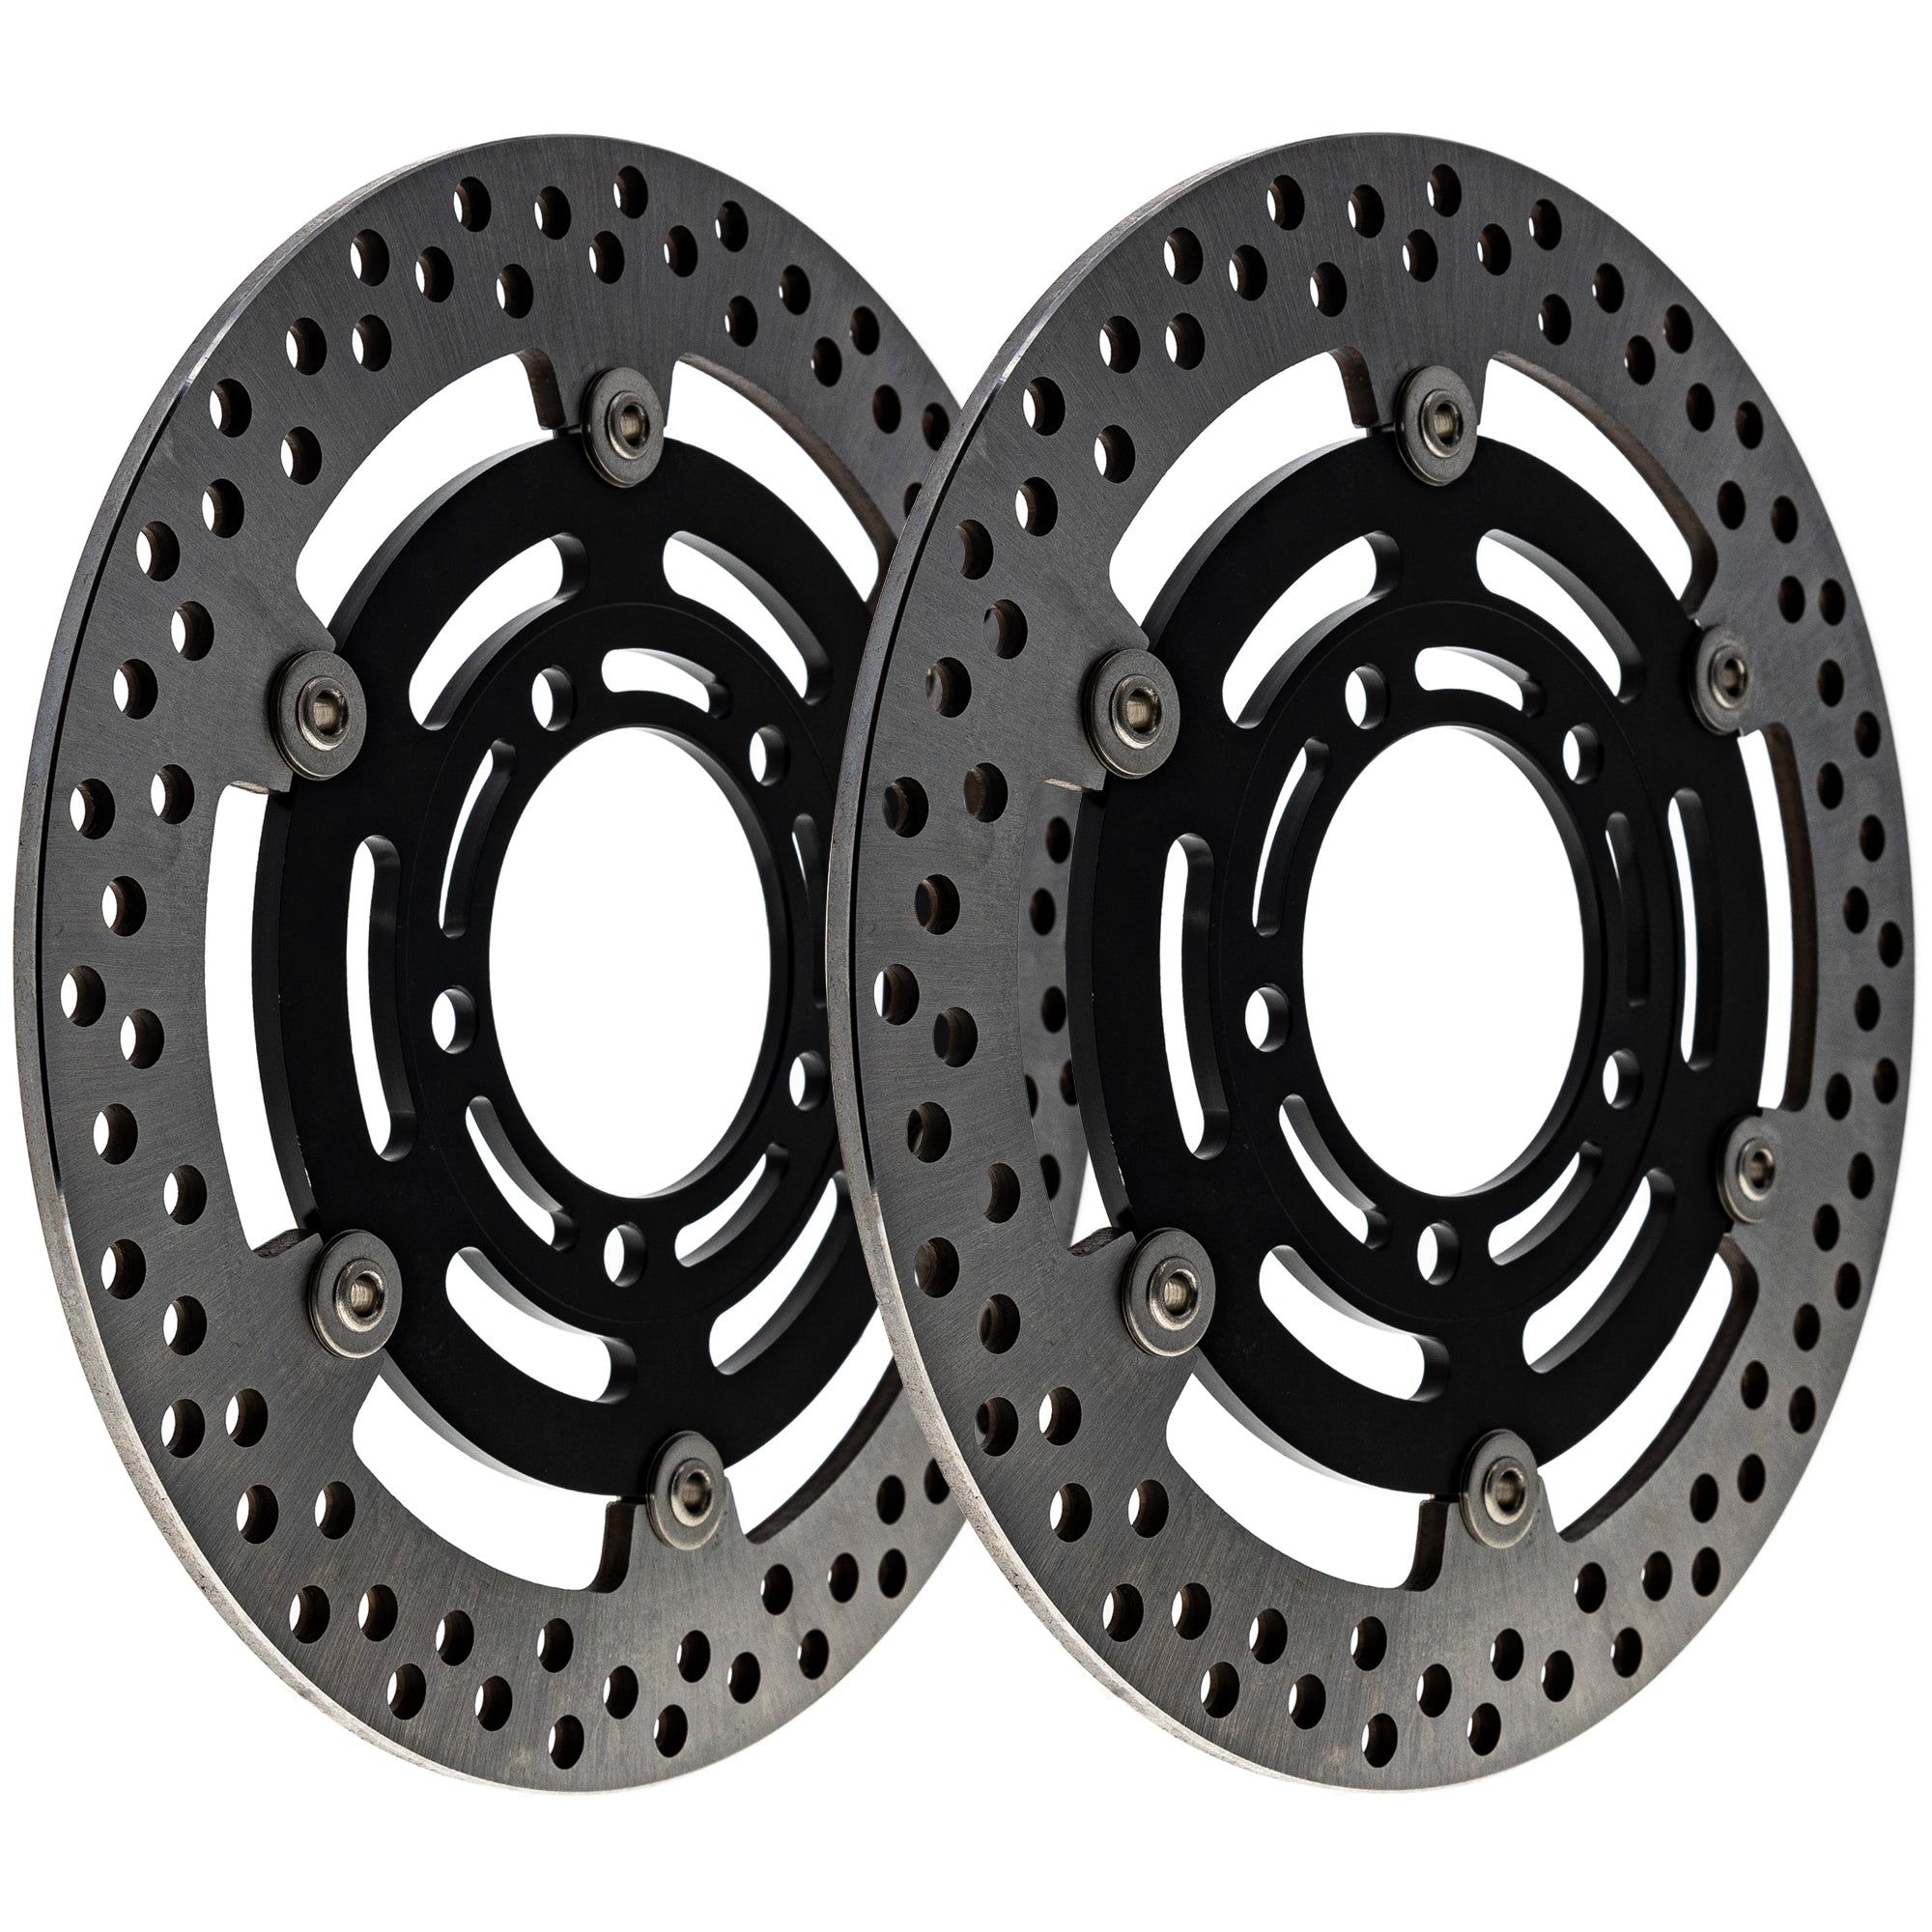 Front Brake Rotor 2-Pack for zOTHER Ninja NICHE 519-CRT2298R